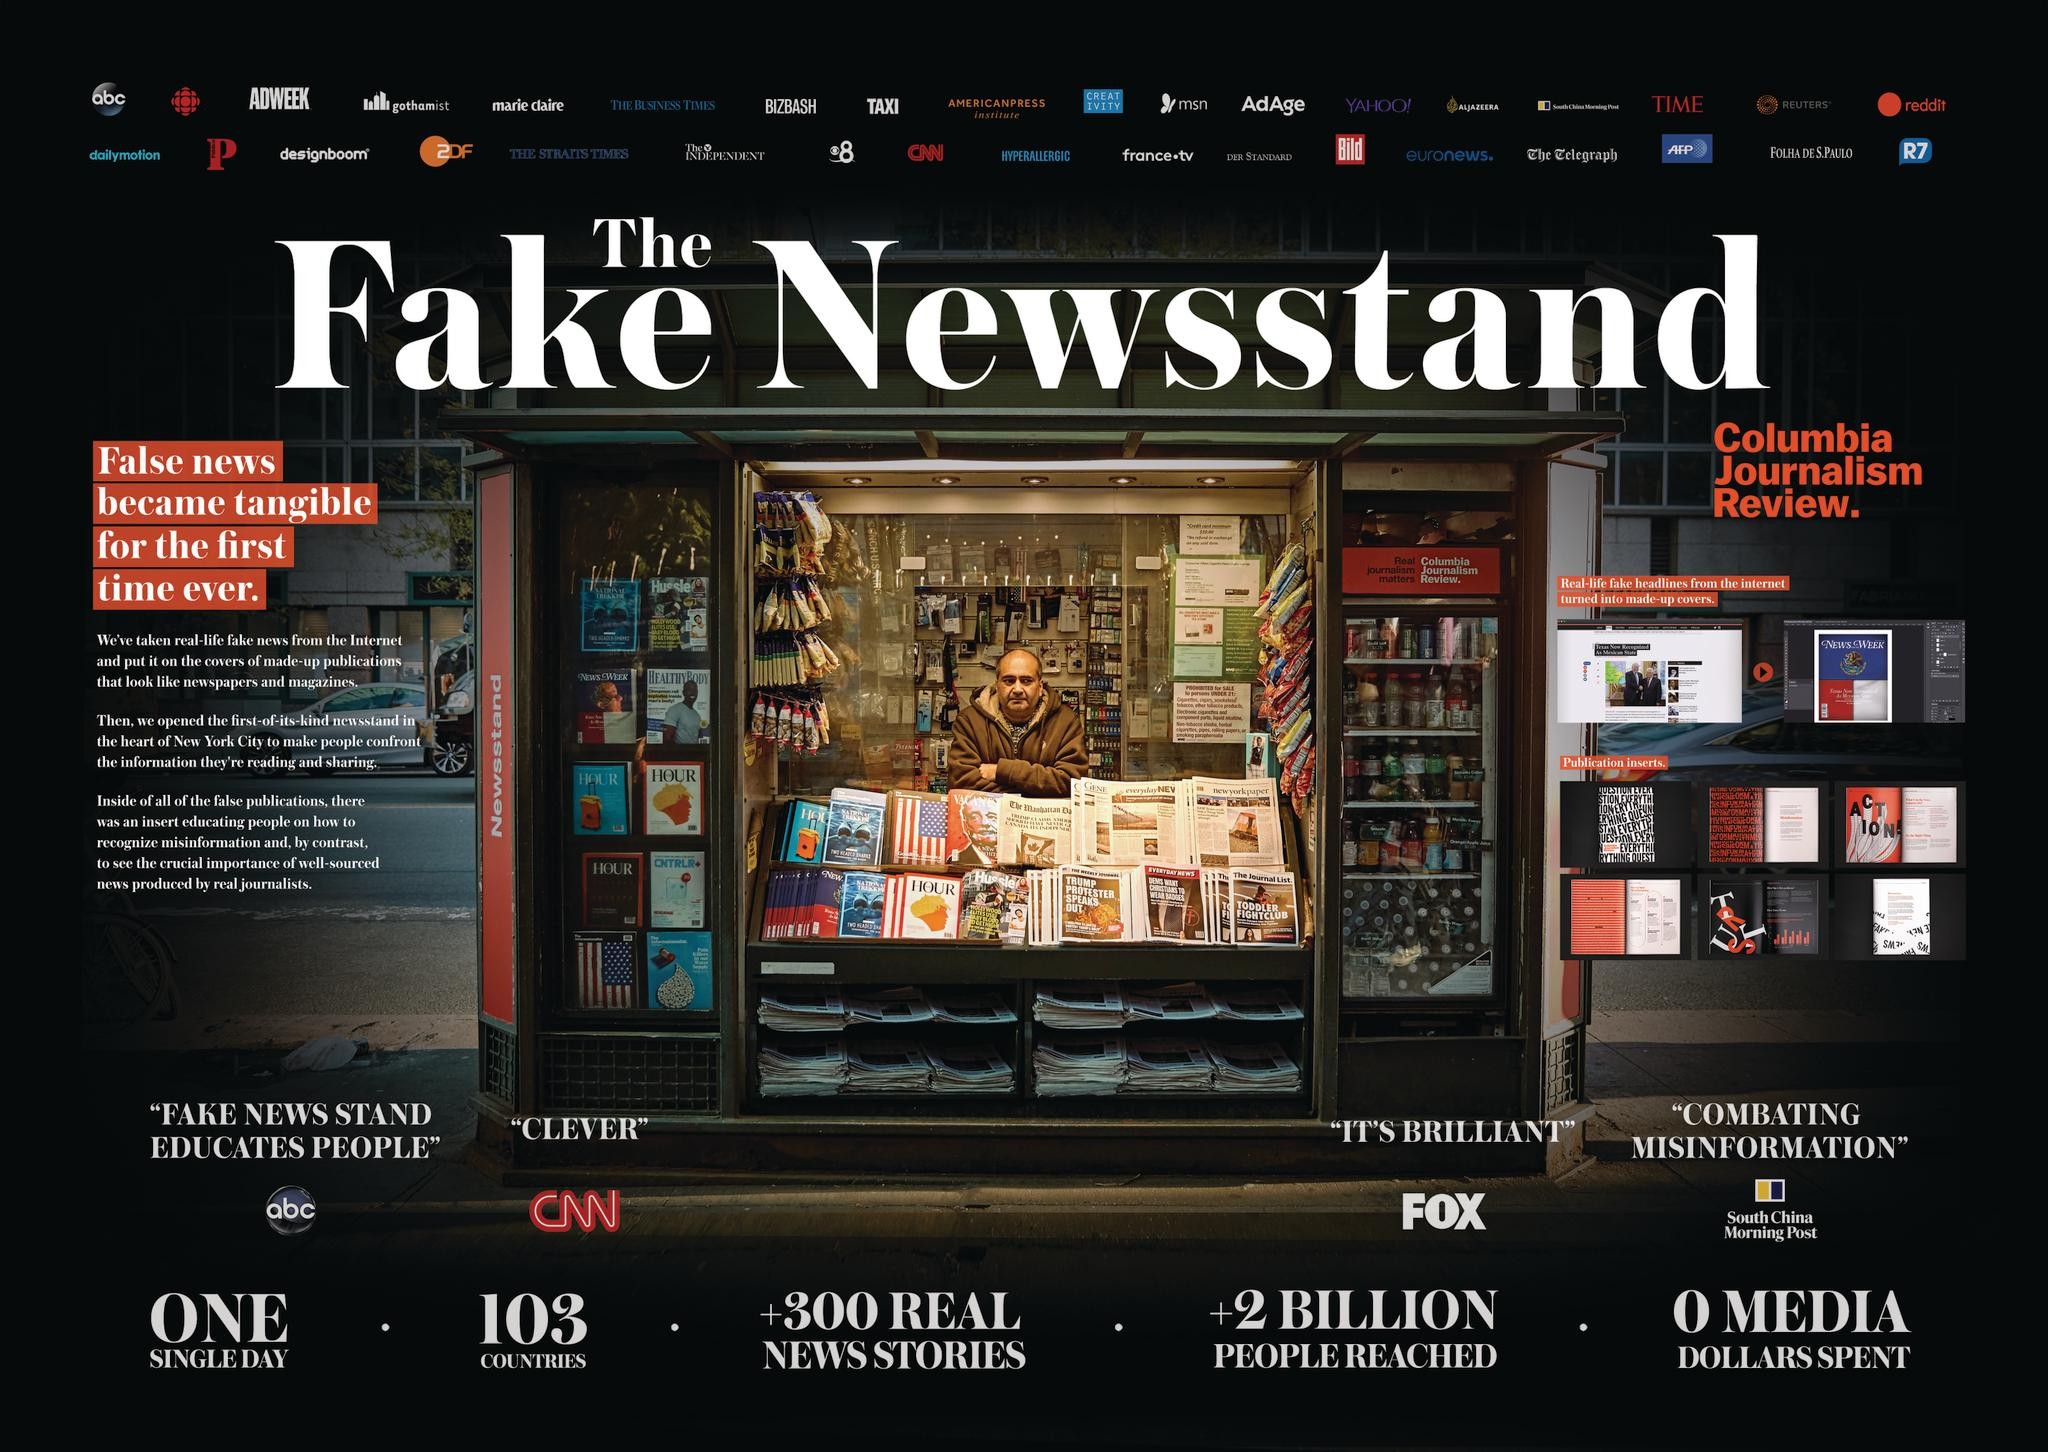 THE FAKE NEWS STAND